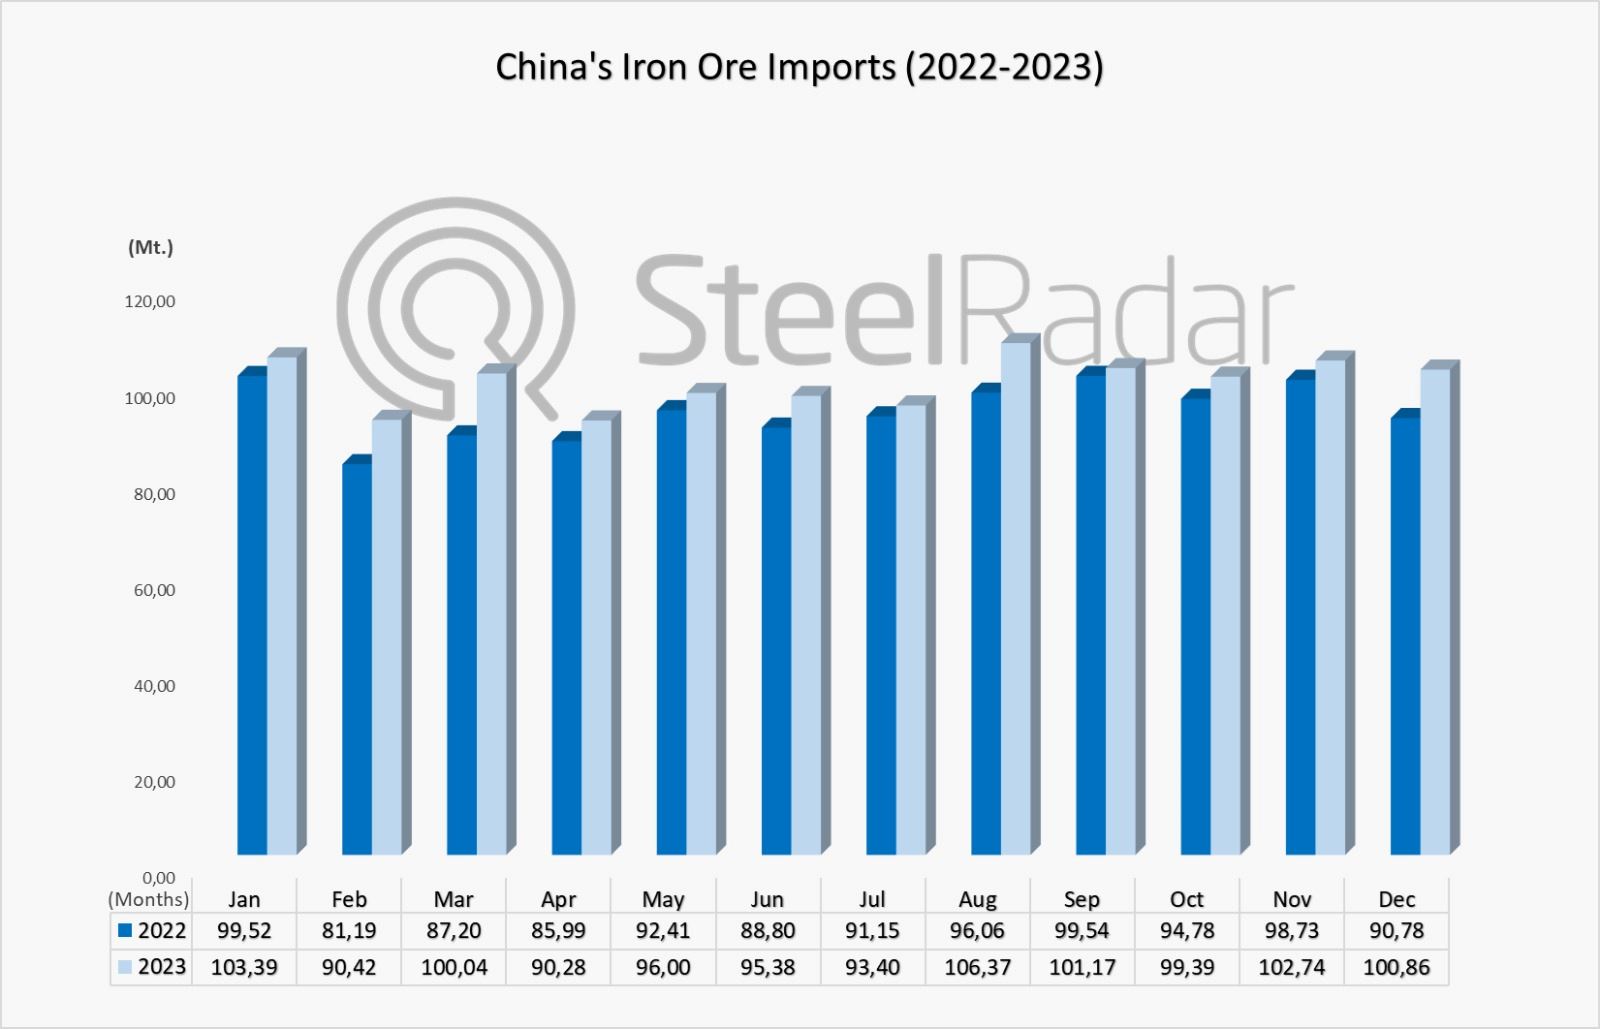 China's iron ore imports recorded a record increase in 2023